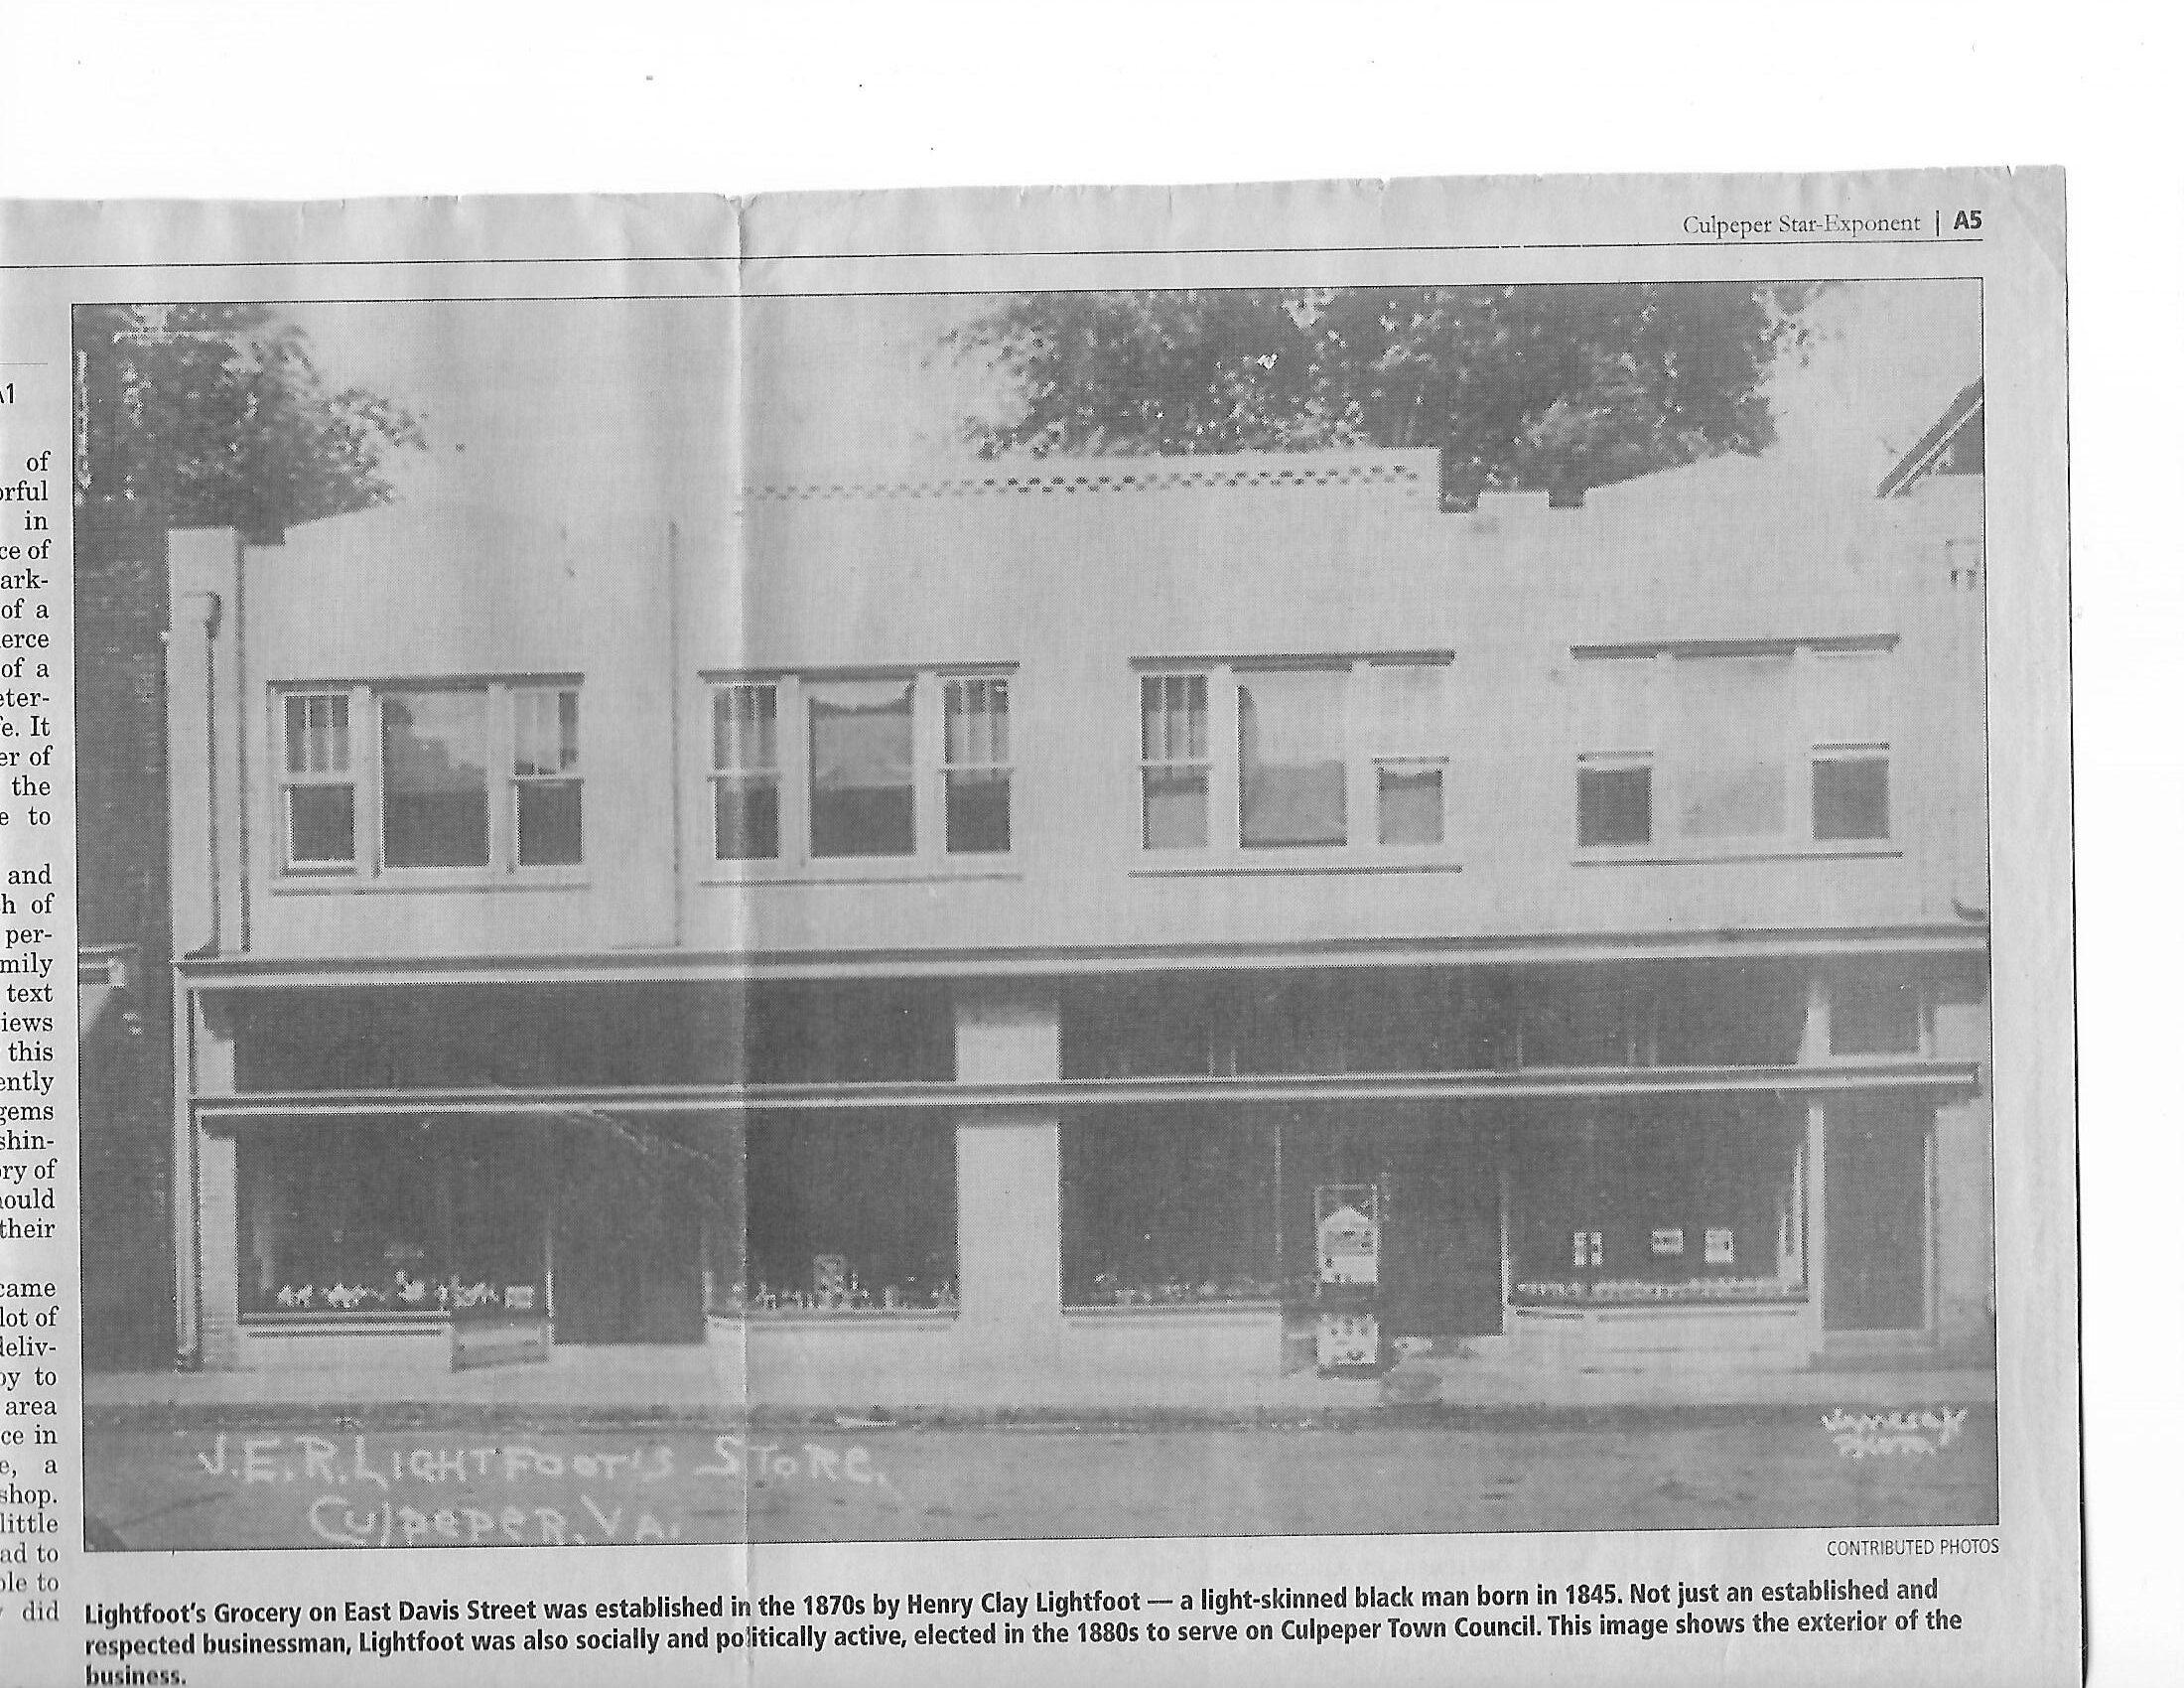 Photo of Lightfoot's grocery